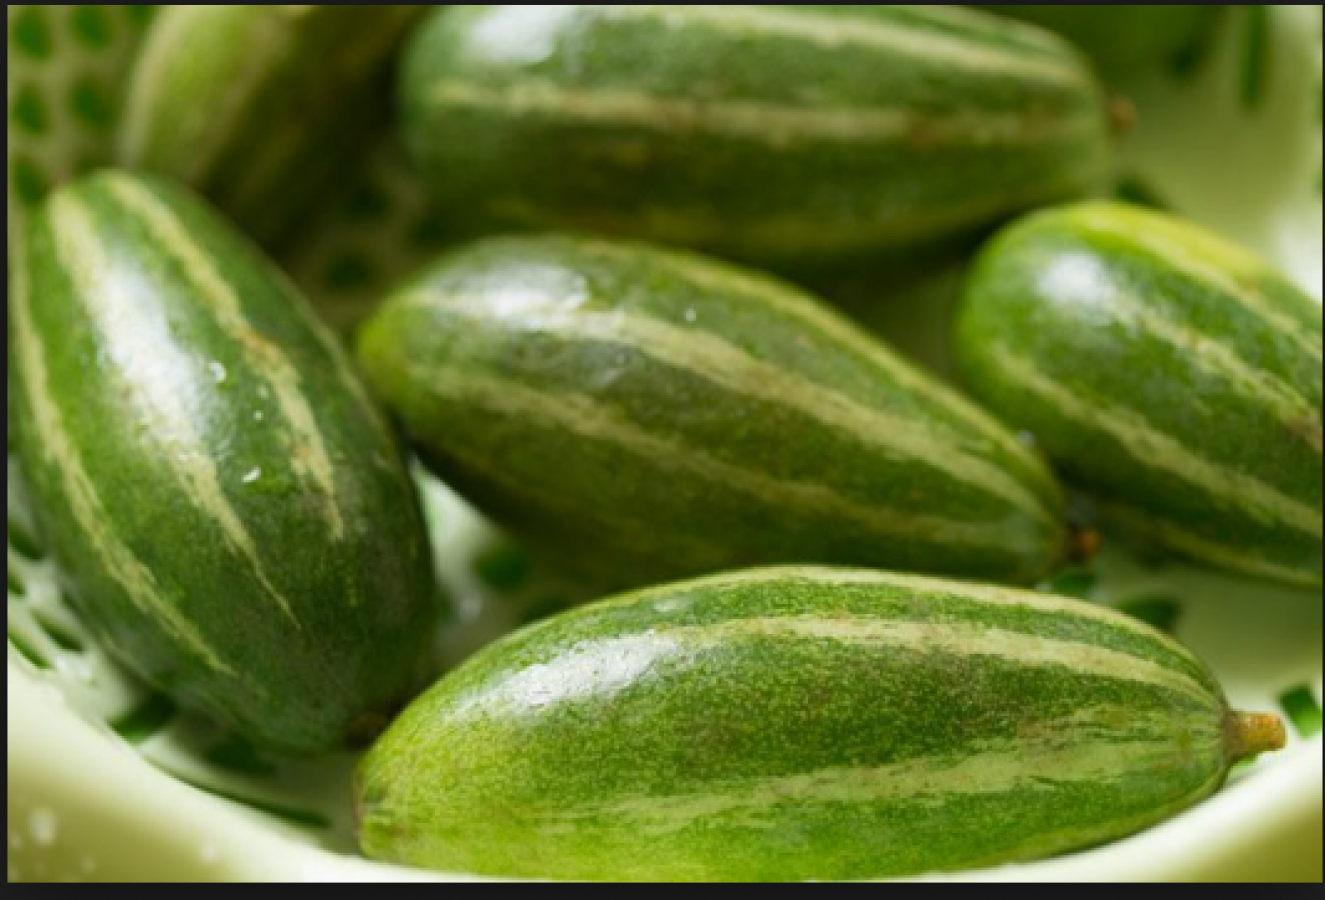 By clearing Constipation Pointed Gourd helps to Cleanse Blood, These Are Other Benefits | NewsTrack English 1